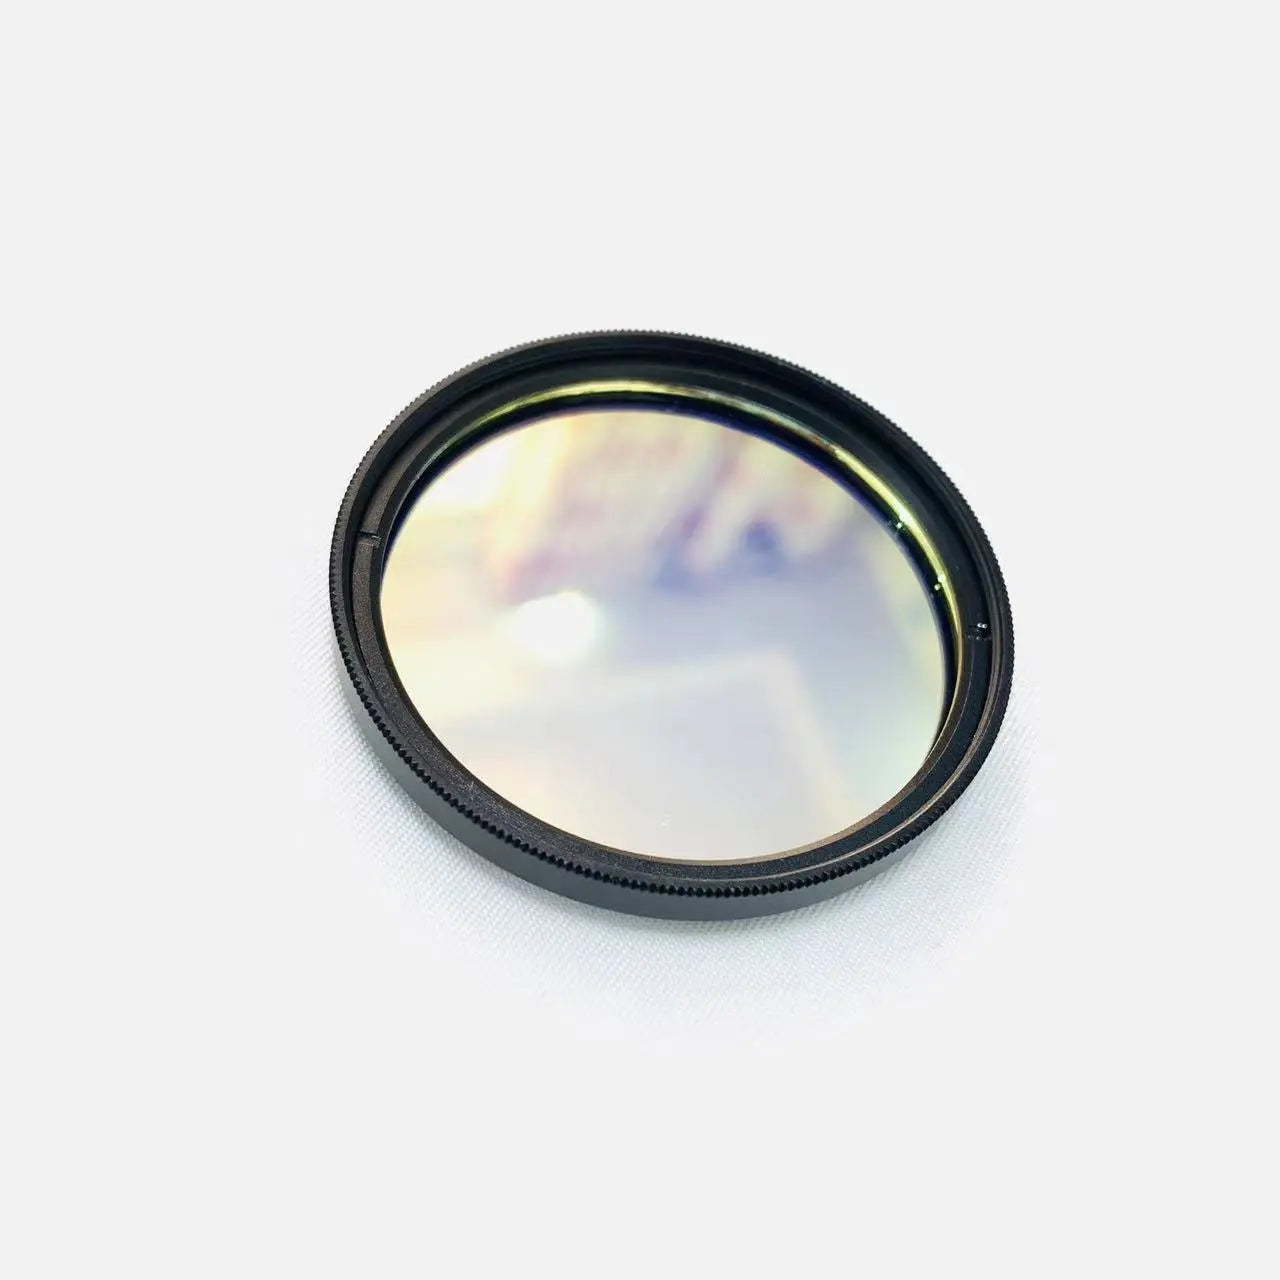 OIII Filter Astrophotography 67mm